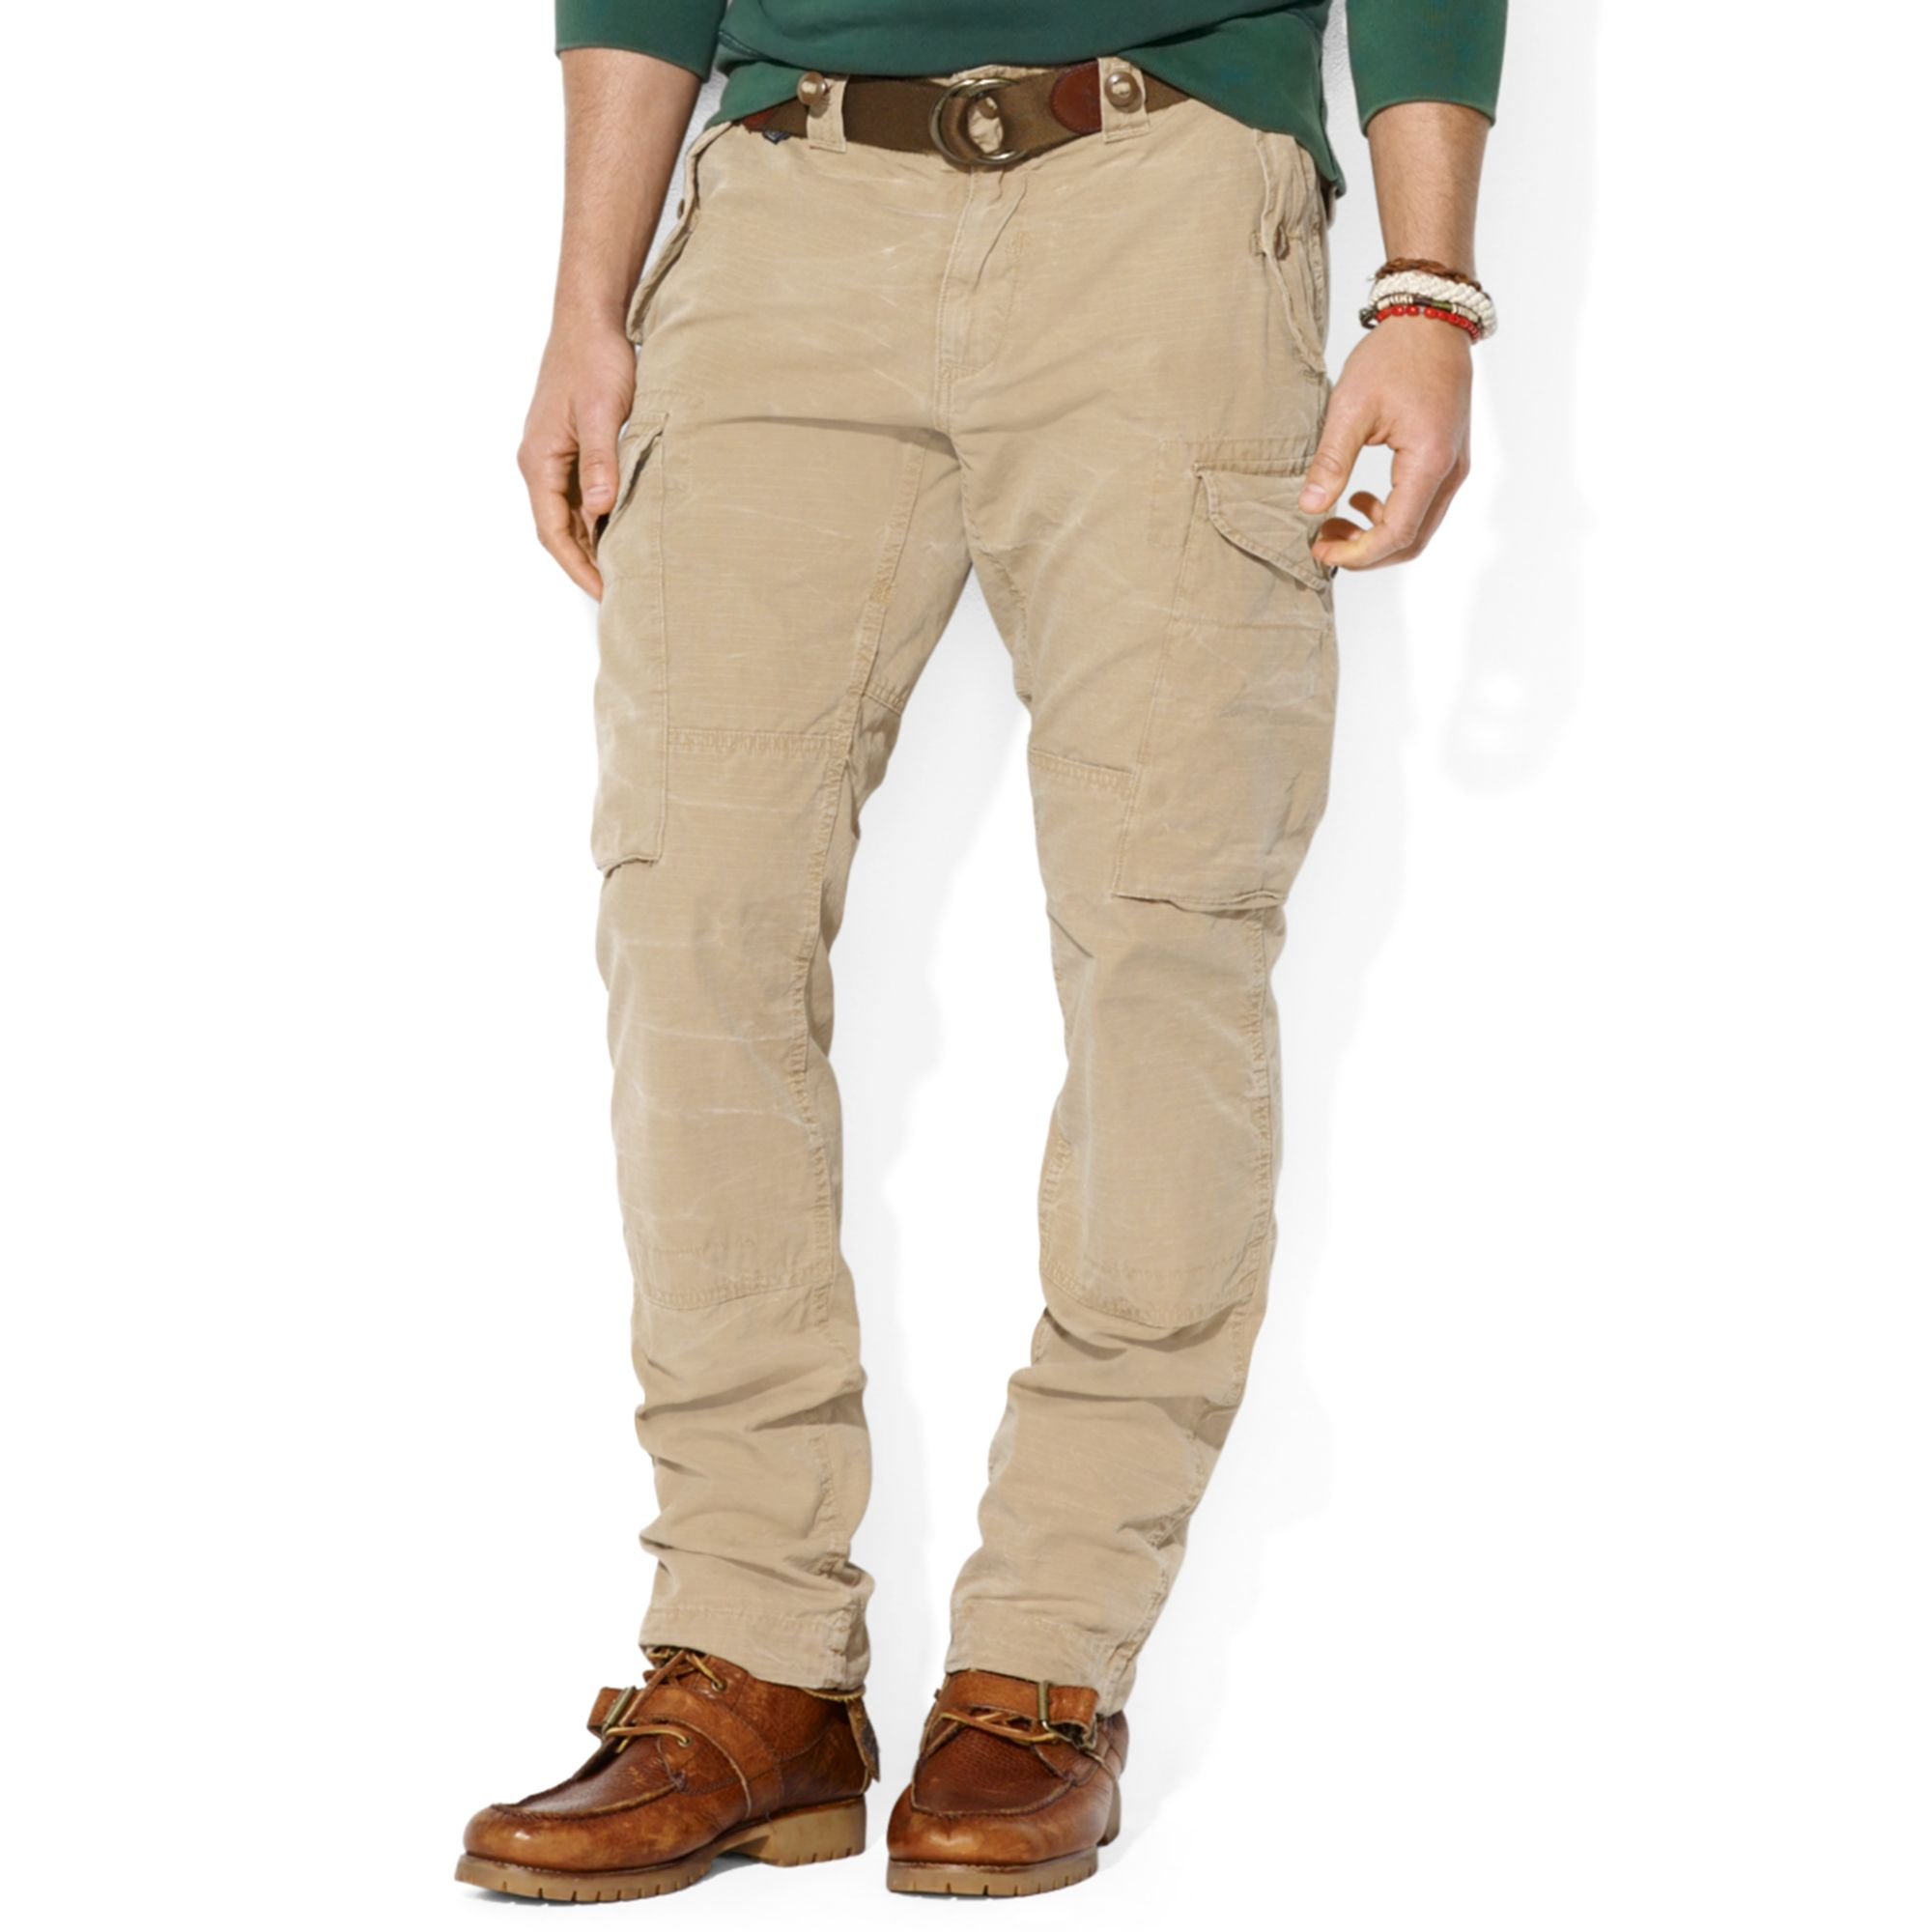 pants ralph lauren polo cargo straight ripstop canadian khaki beige natural lyst chinos montana clothing